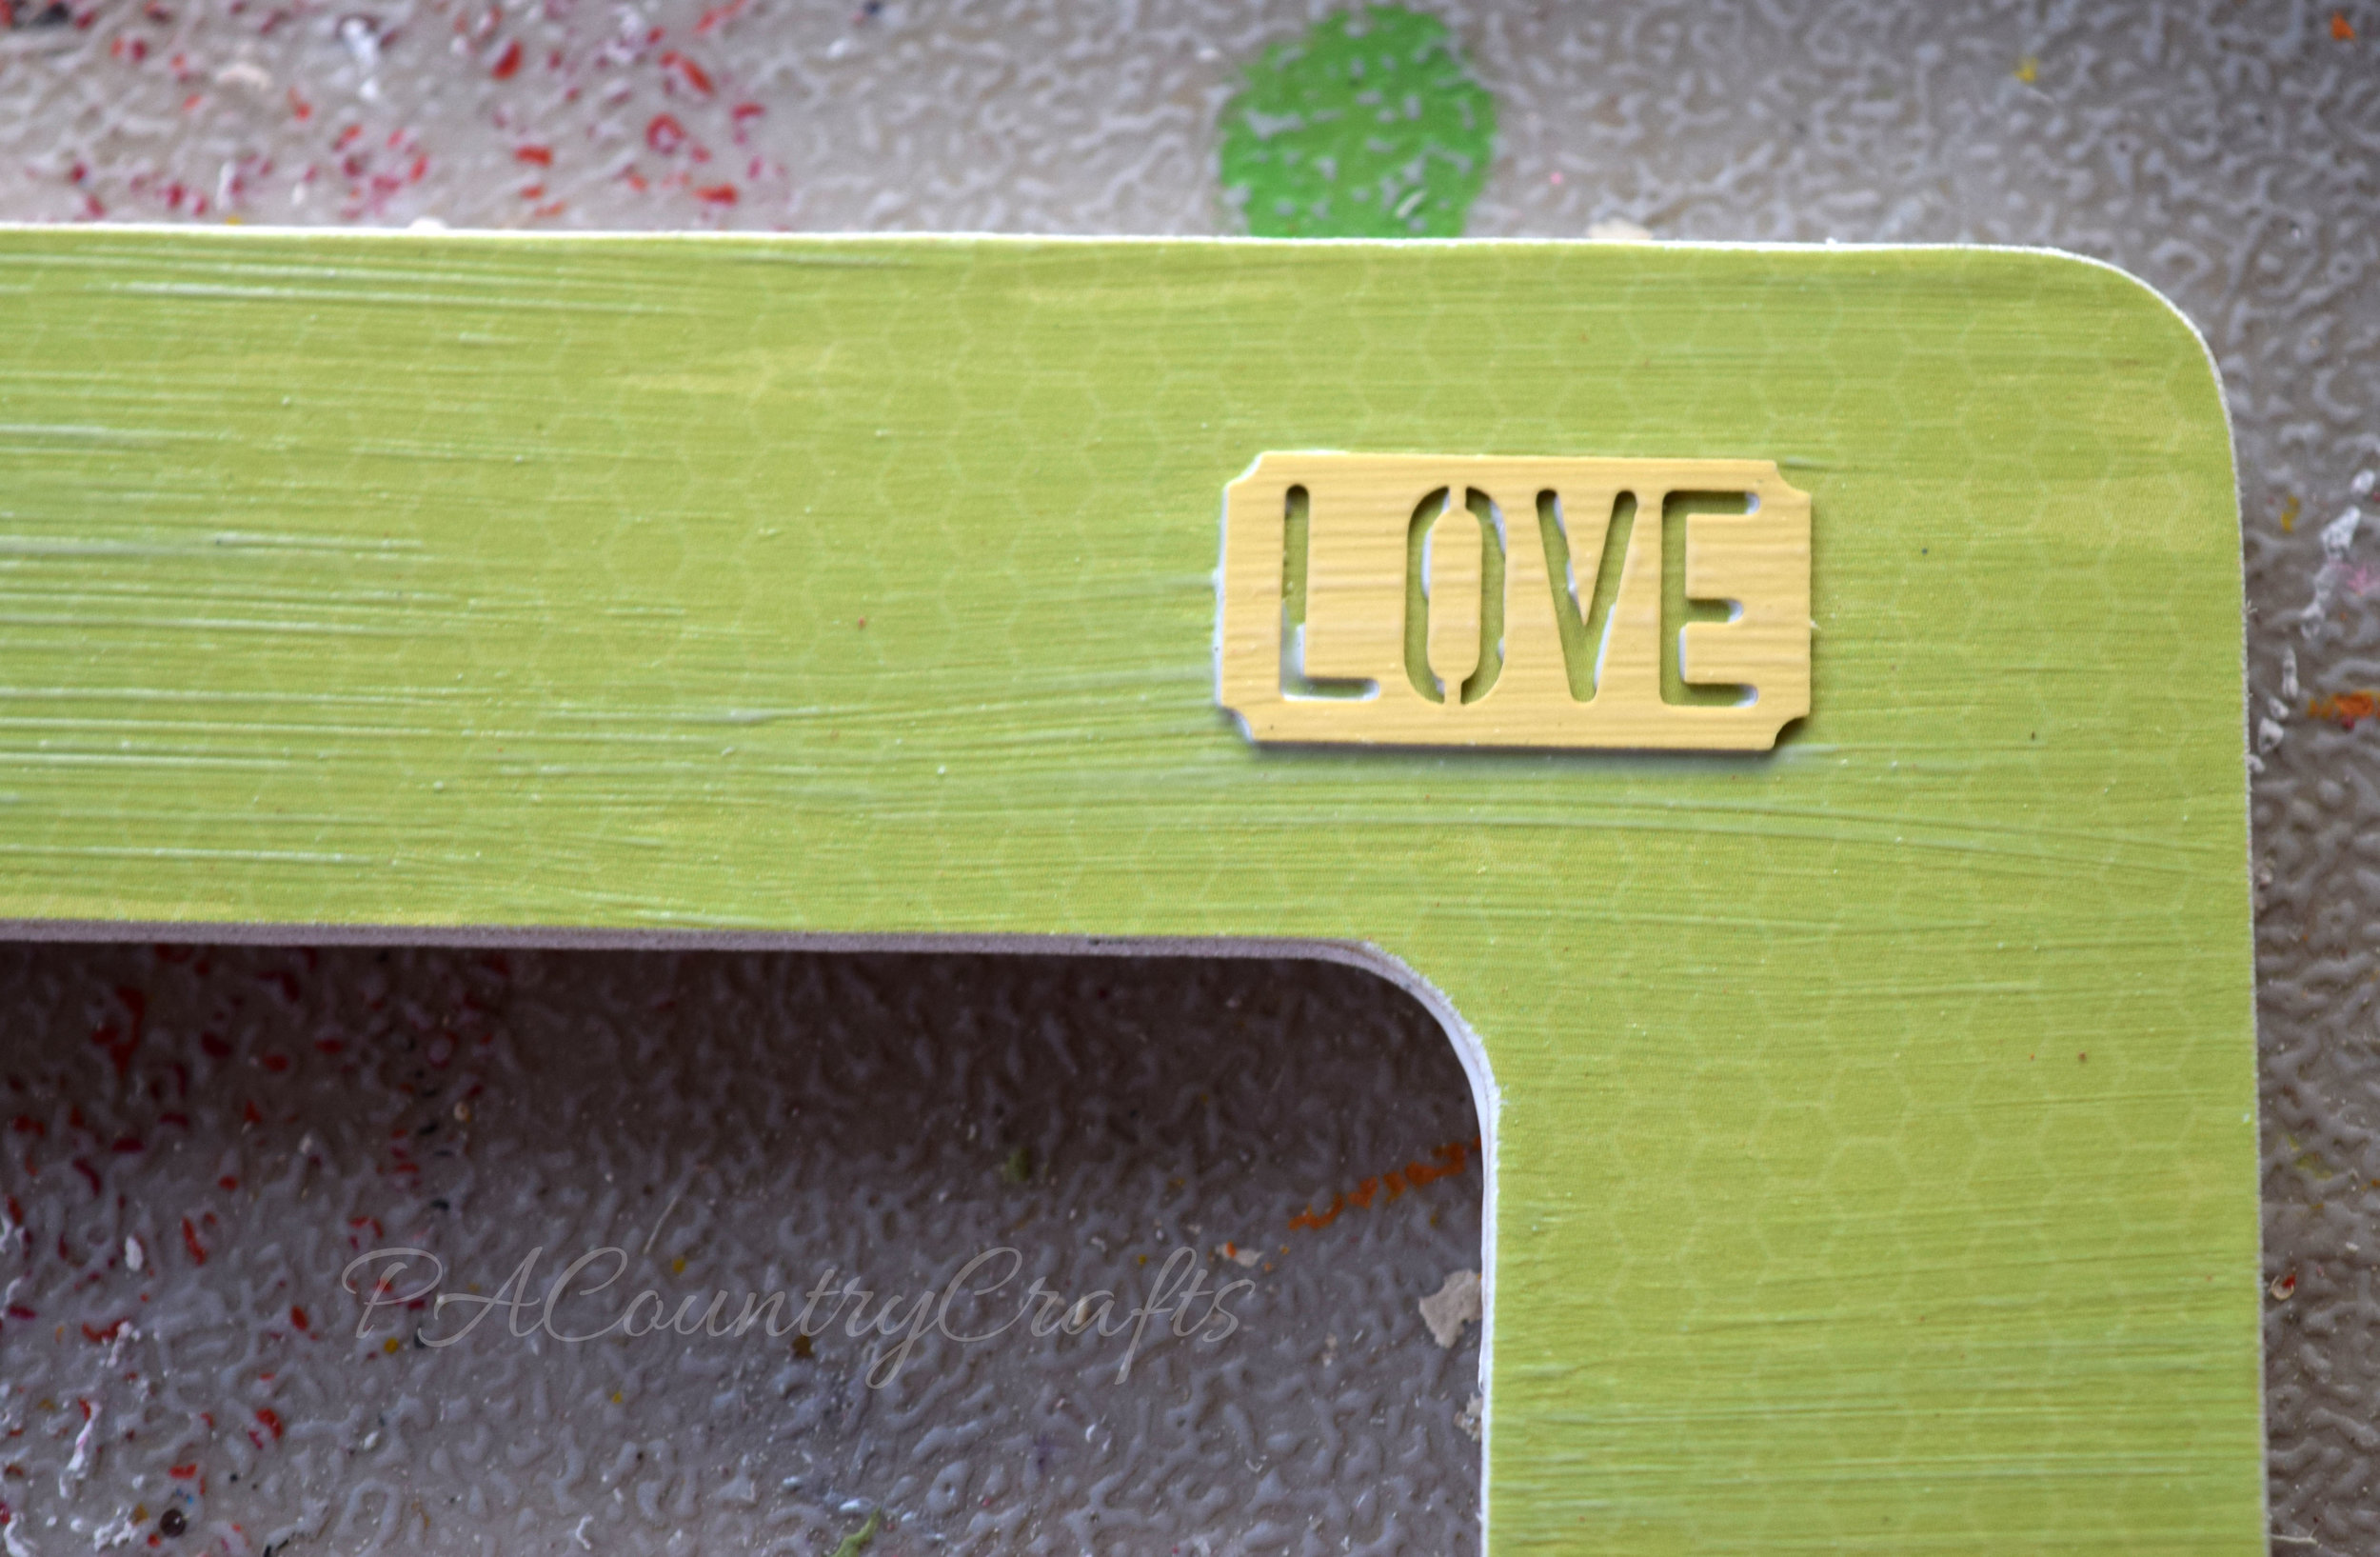 Cute embellishments on a DIY frame. Mod podge is great!